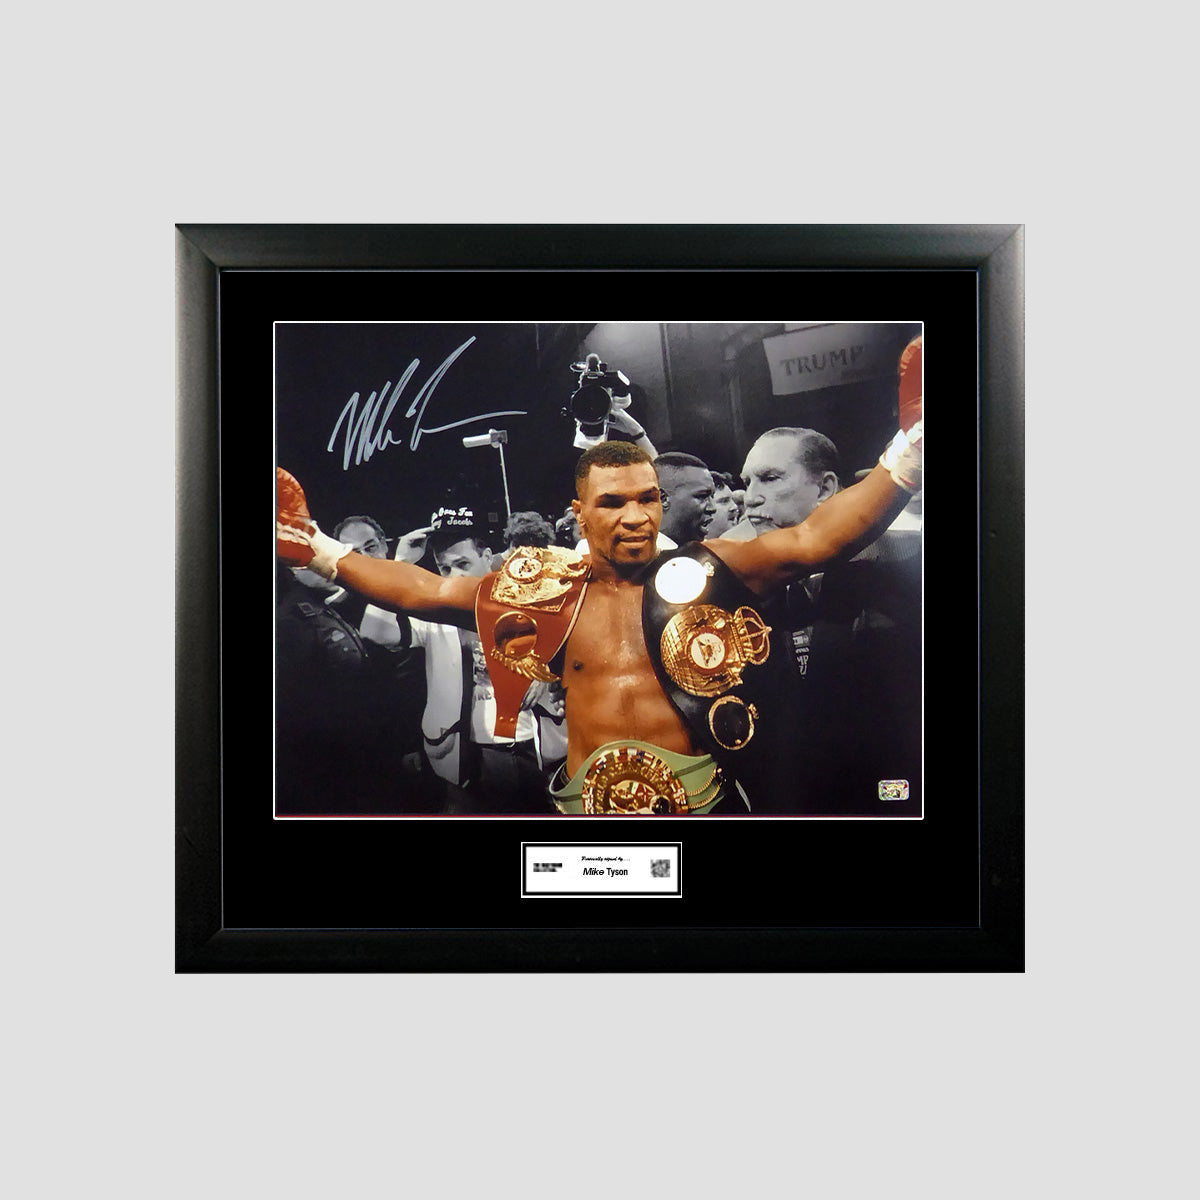 Mike Tyson Signed Boxing Image 20x16: Victory Over Michael Spinks (Framed) - The Bootroom Collection